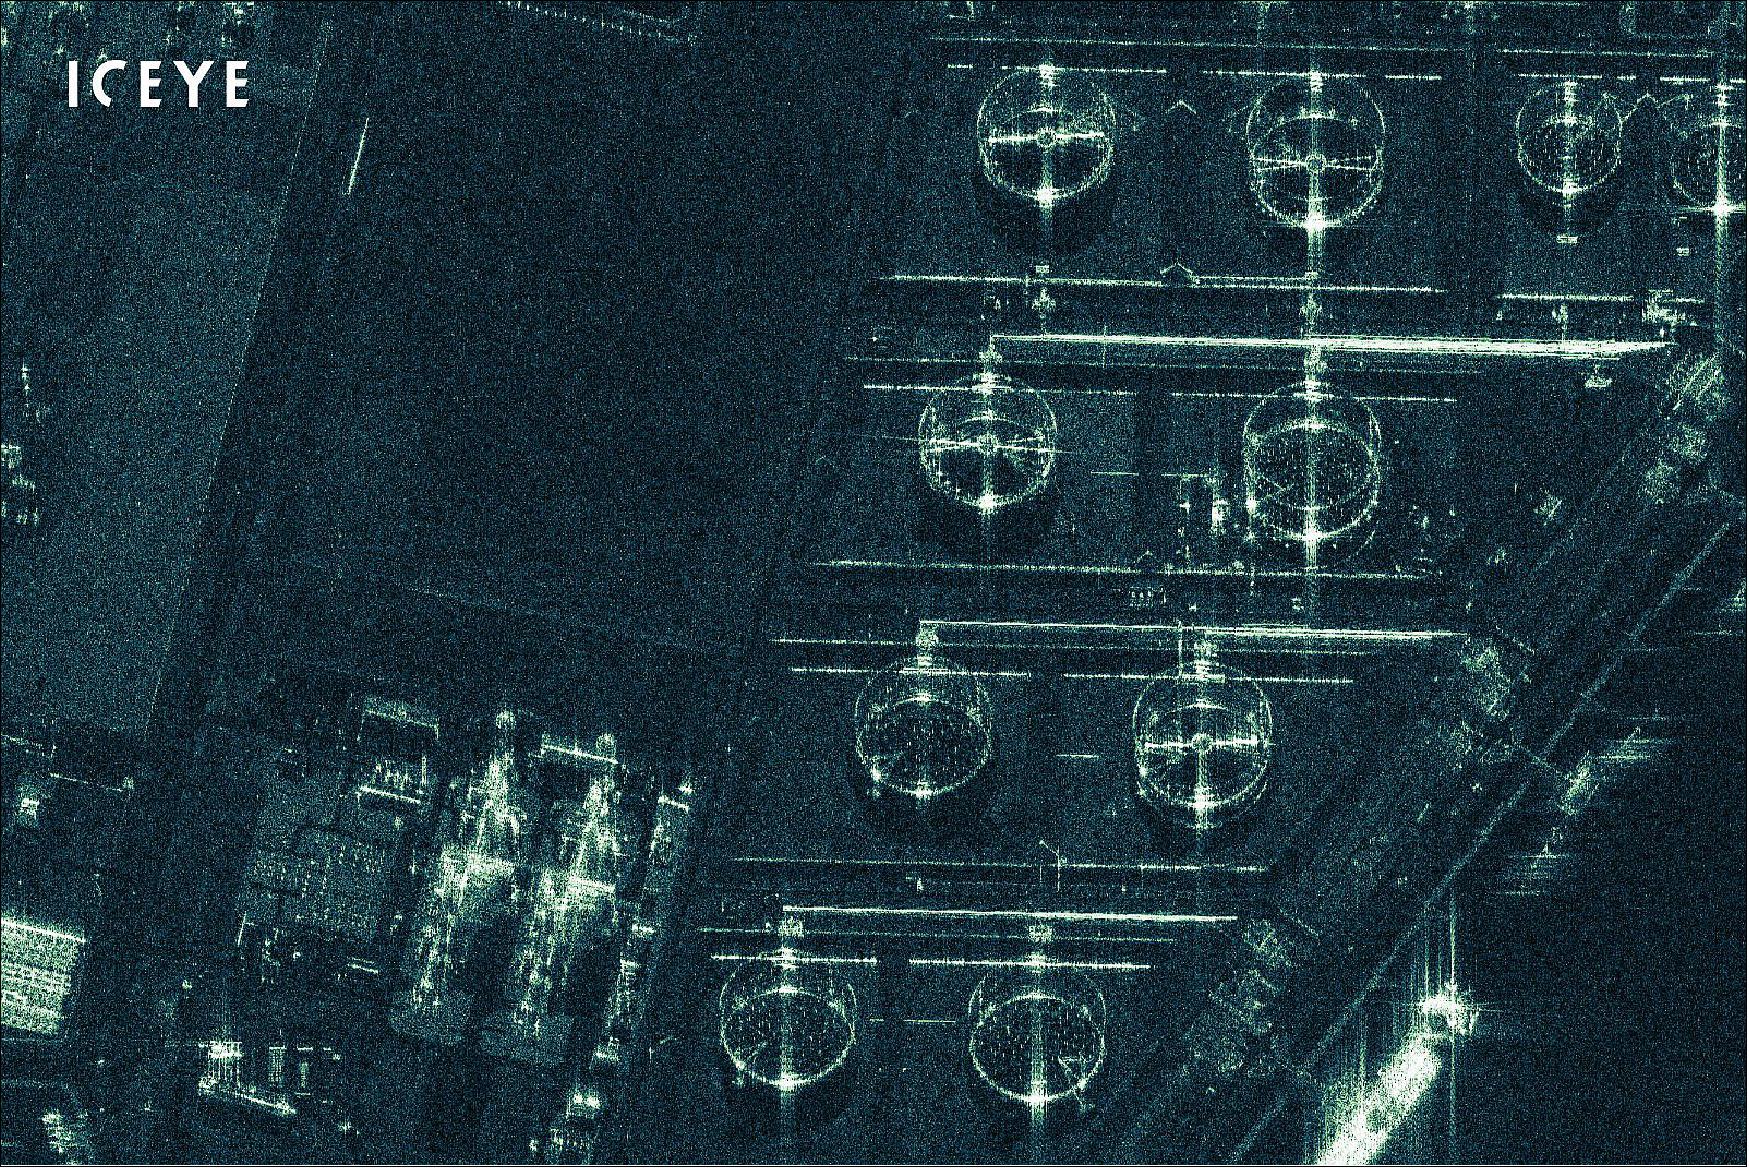 Figure 43: A compressed preview image of ICEYE radar satellite imagery, originally acquired at 25 cm resolution, showing oil tanks in Rotterdam, The Netherlands (image credit: ICEYE)